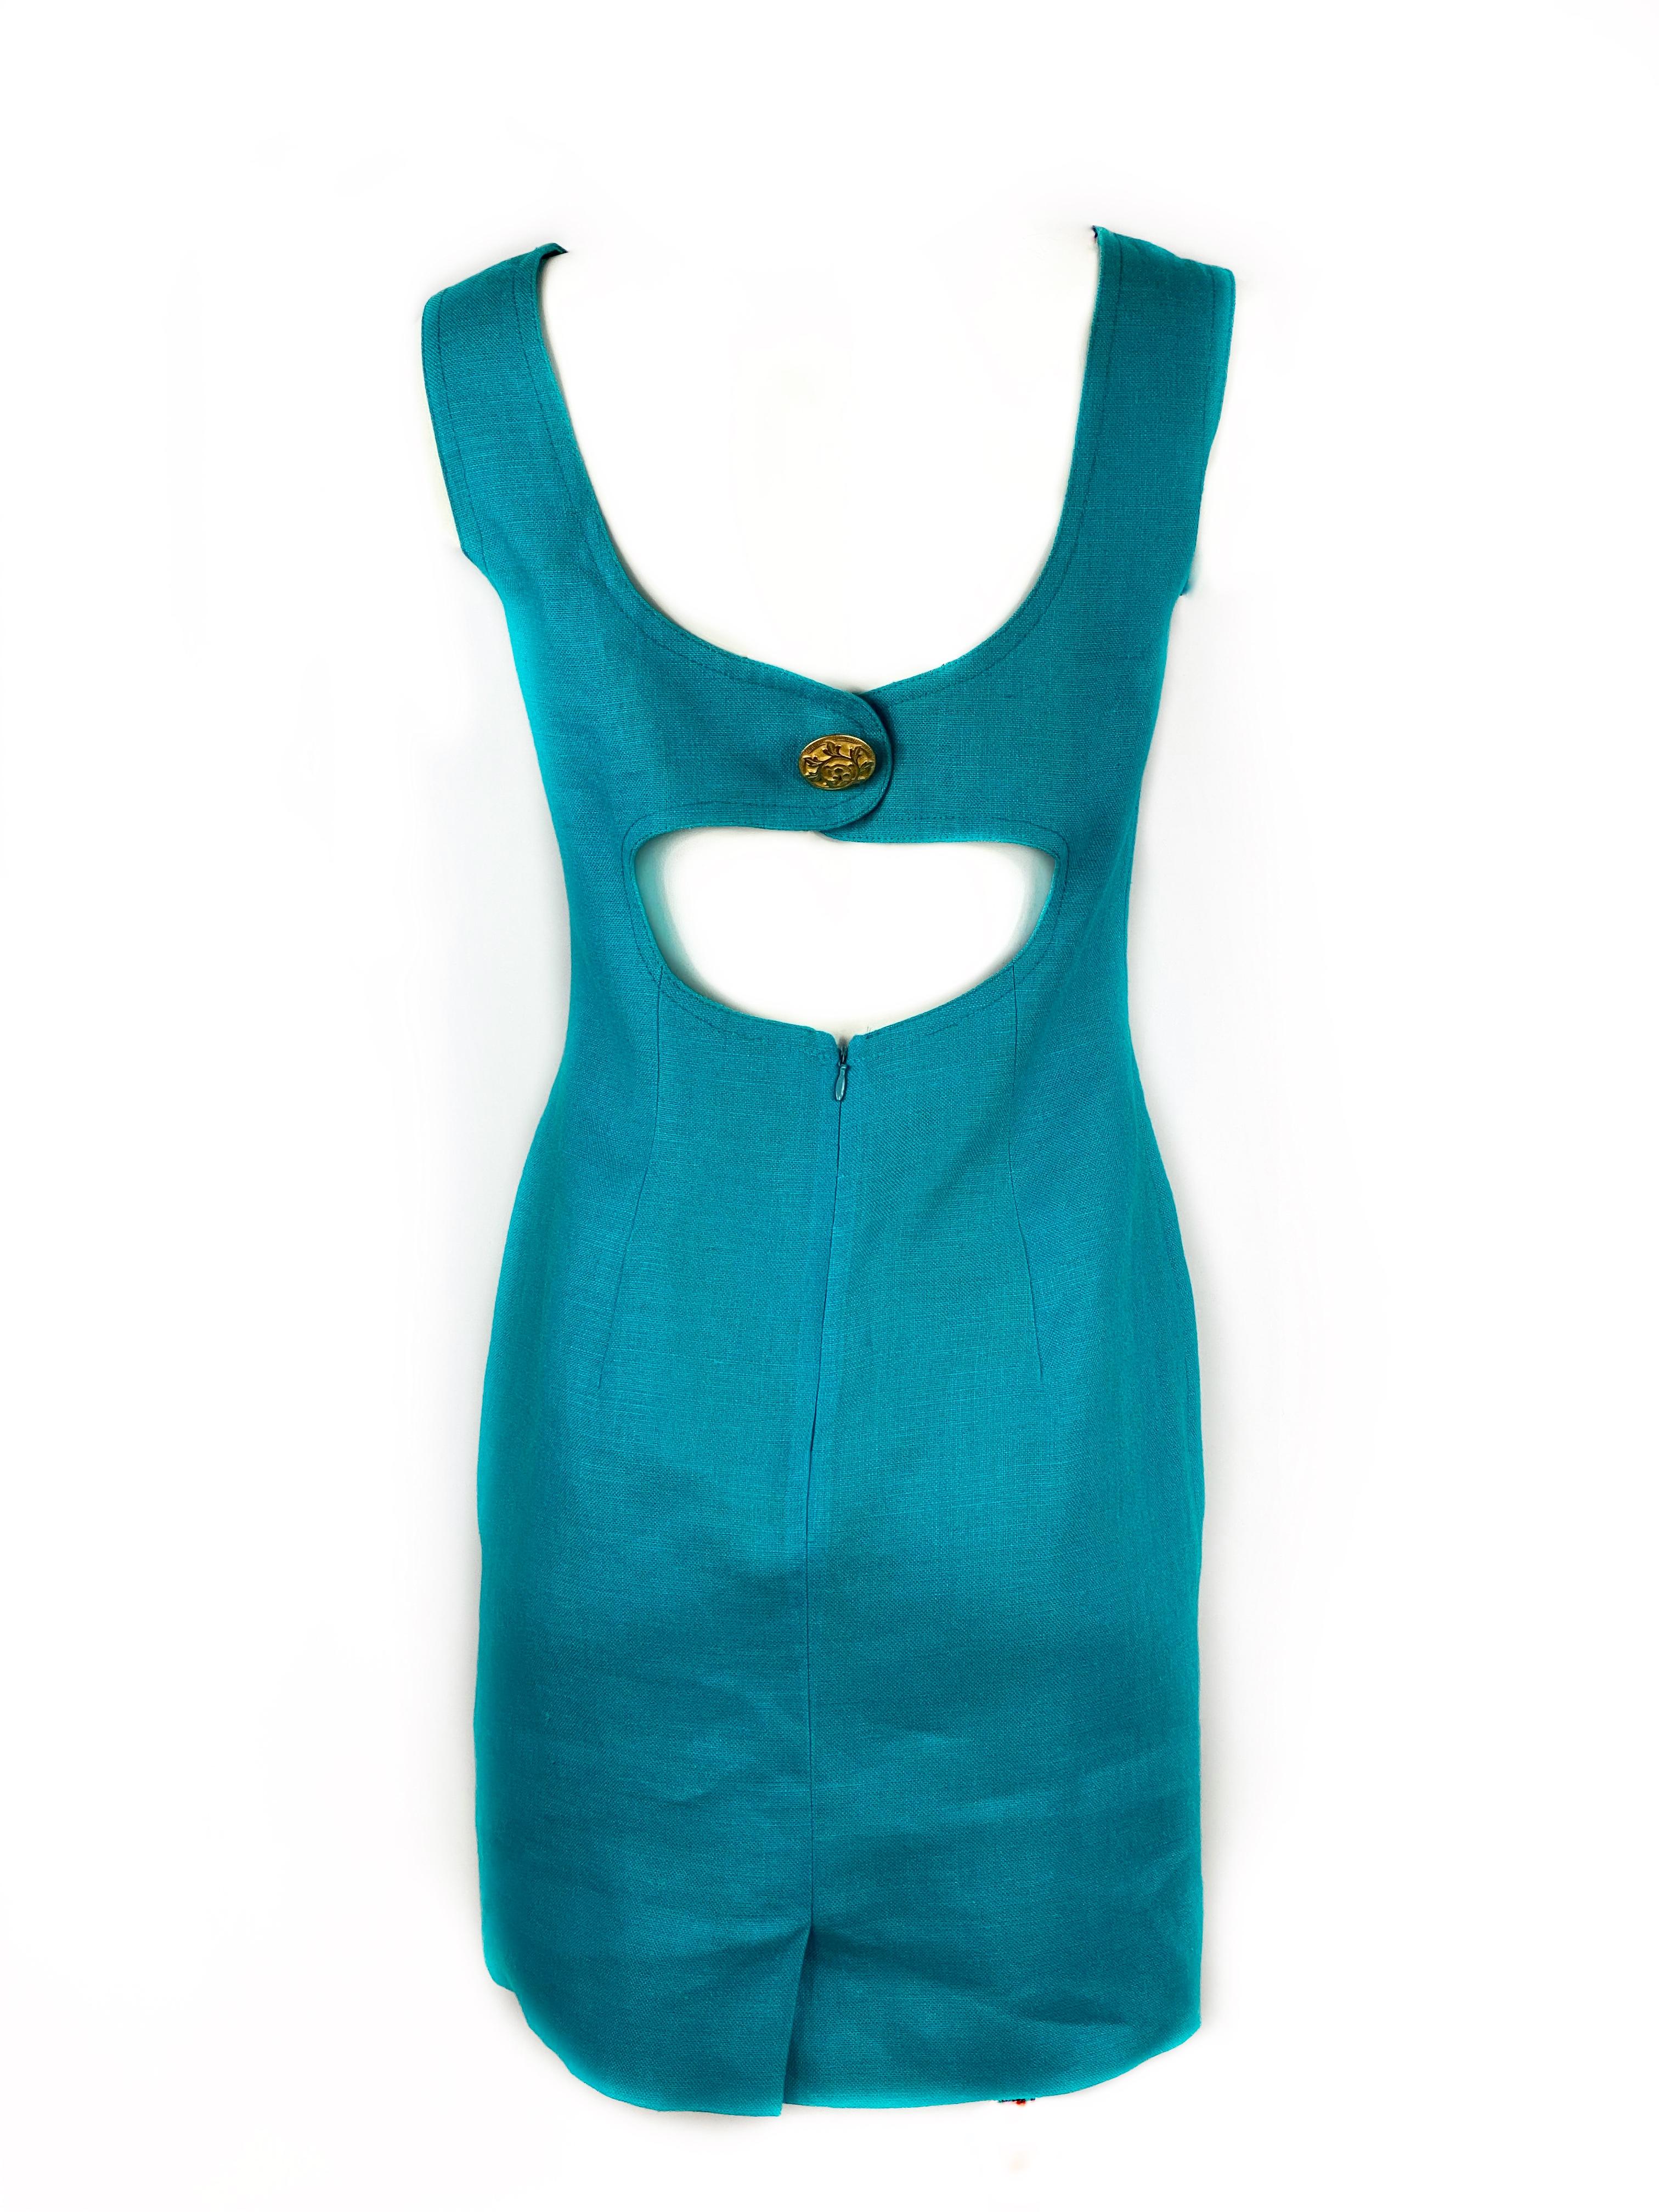 Scaasi Blue Turquoise Linen Sleeveless Mini Dress w/ Gold Buttons Size 4

Product details:
Size 4
Sleeveless 
Featuring open back detail
Gold tone button w/ leaves detail, two on the front and one on the back
Rear zip and button closure
Made in USA
